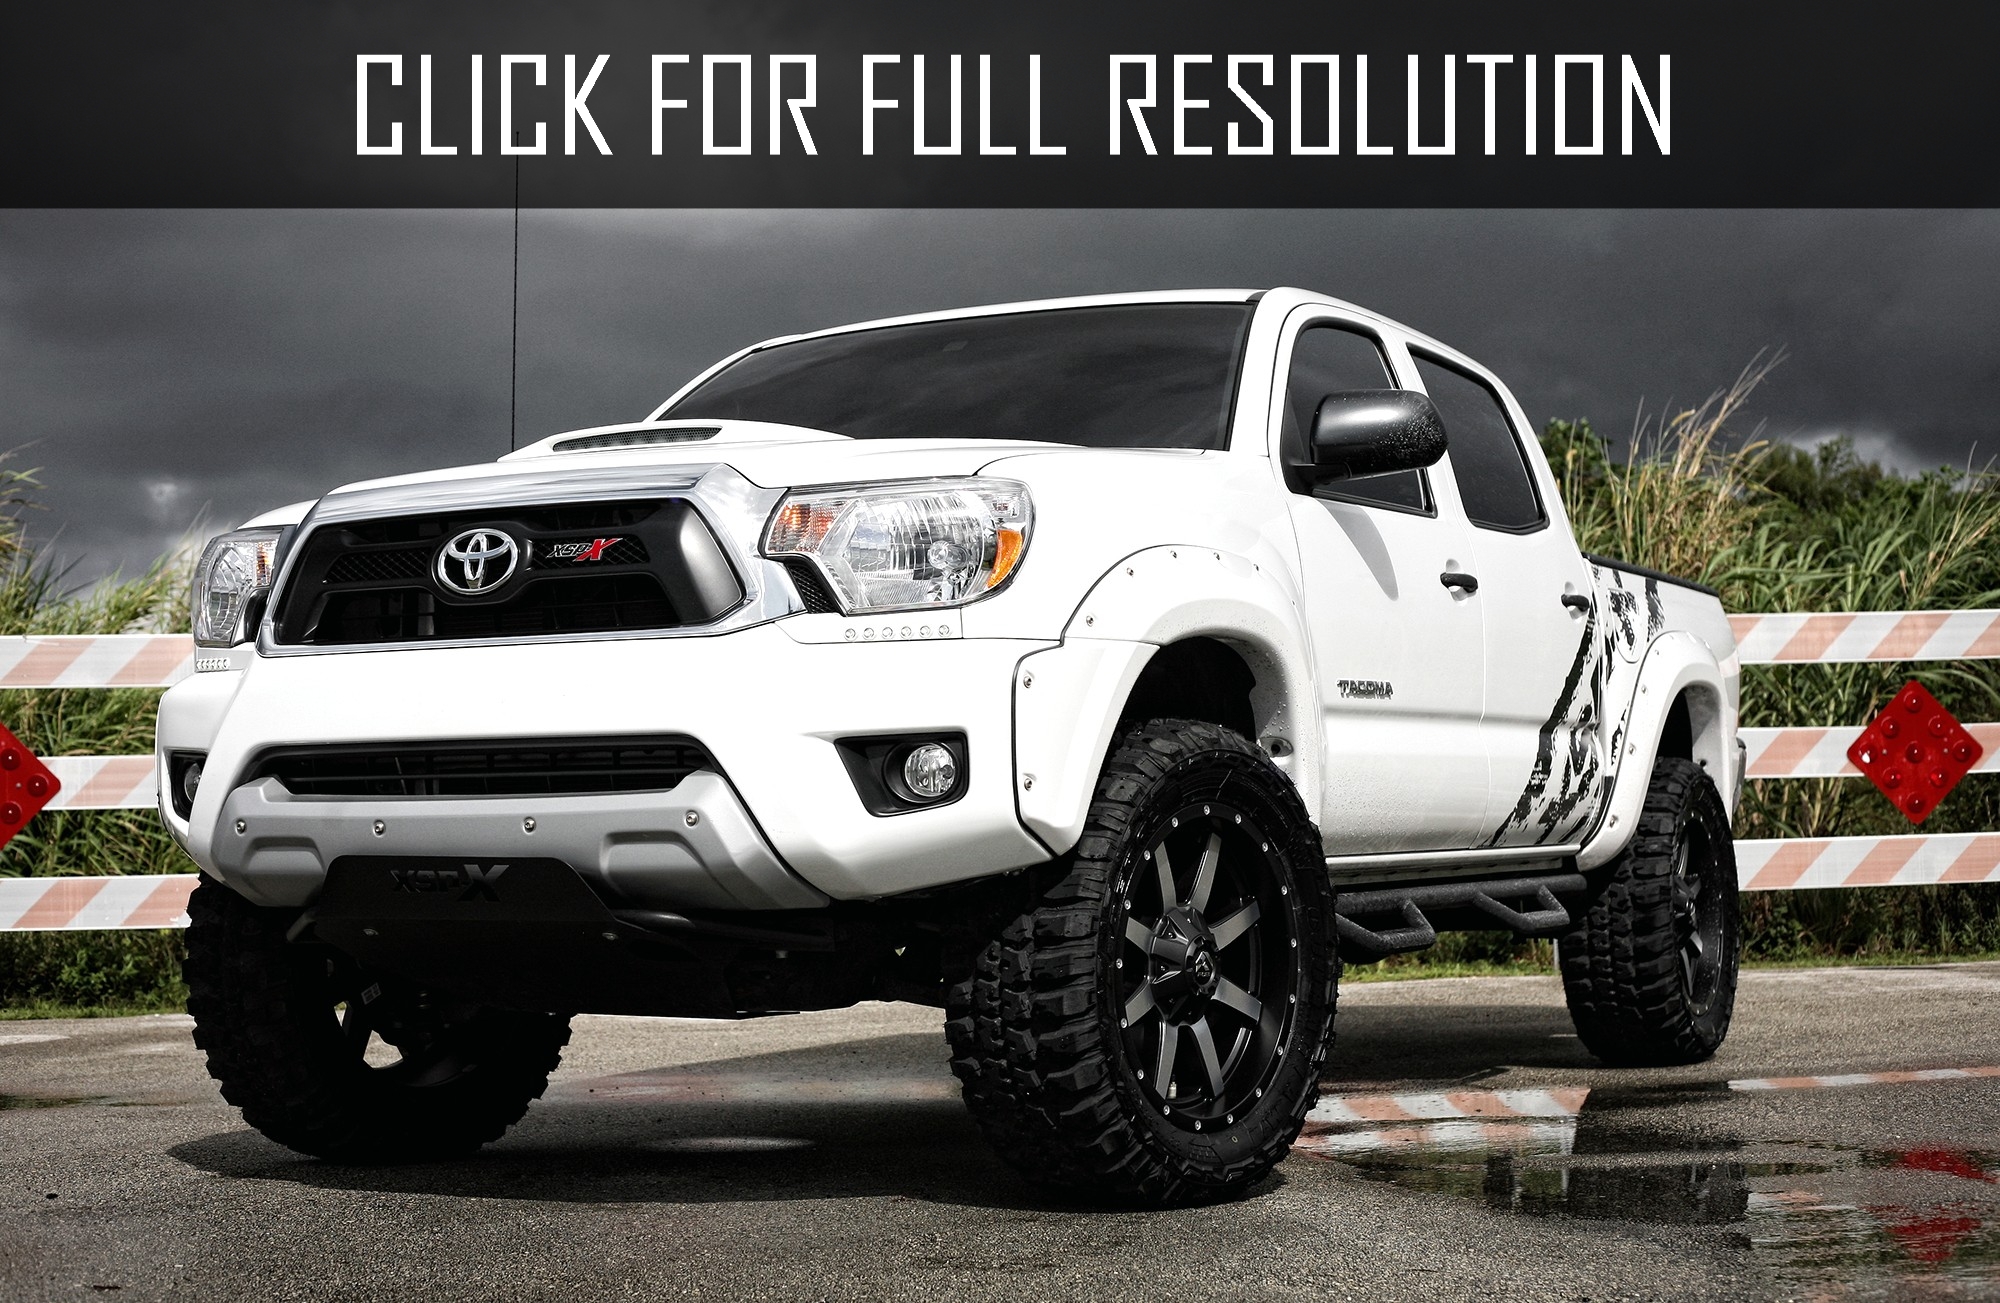 Toyota Tacoma 2015 Redesign Amazing Photo Gallery Some Information